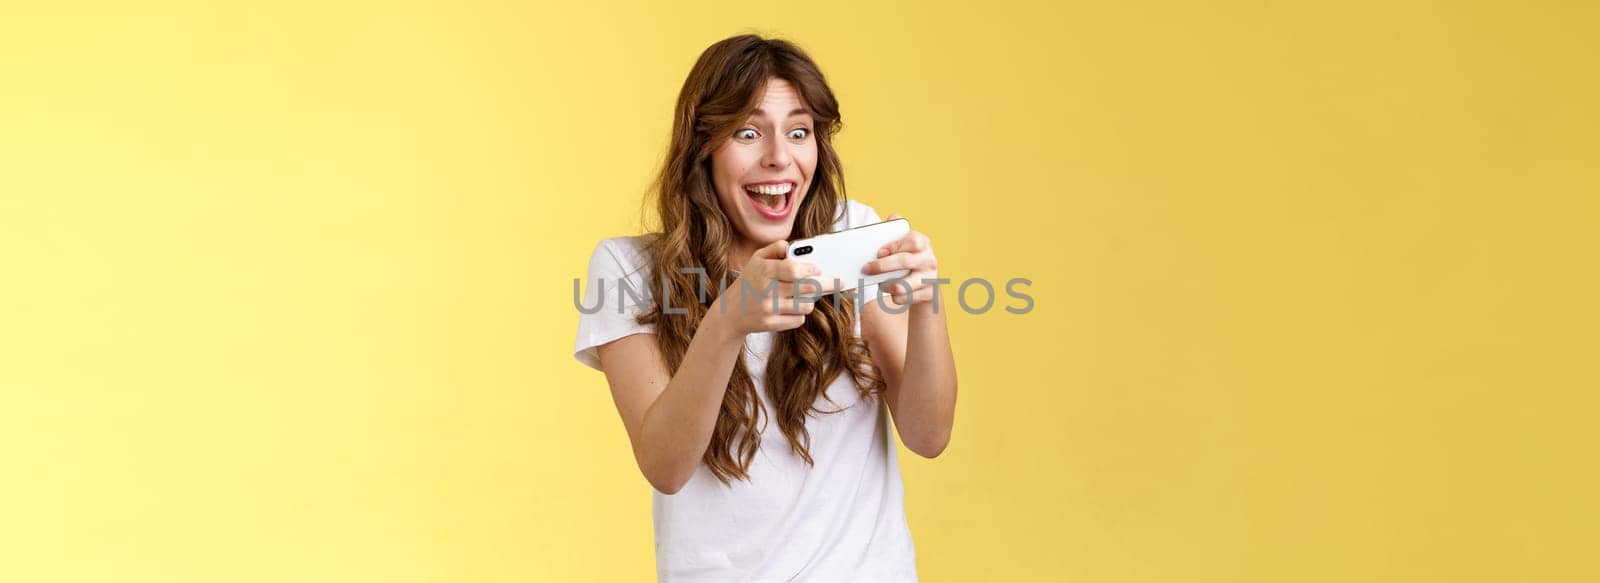 Happy upbeat playful enthusiastic curly-haired girl tempting playing stunning awesome smartphone game hold mobile phone horizontal way smiling broadly stare camera focused winning beat score. Lifestyle.